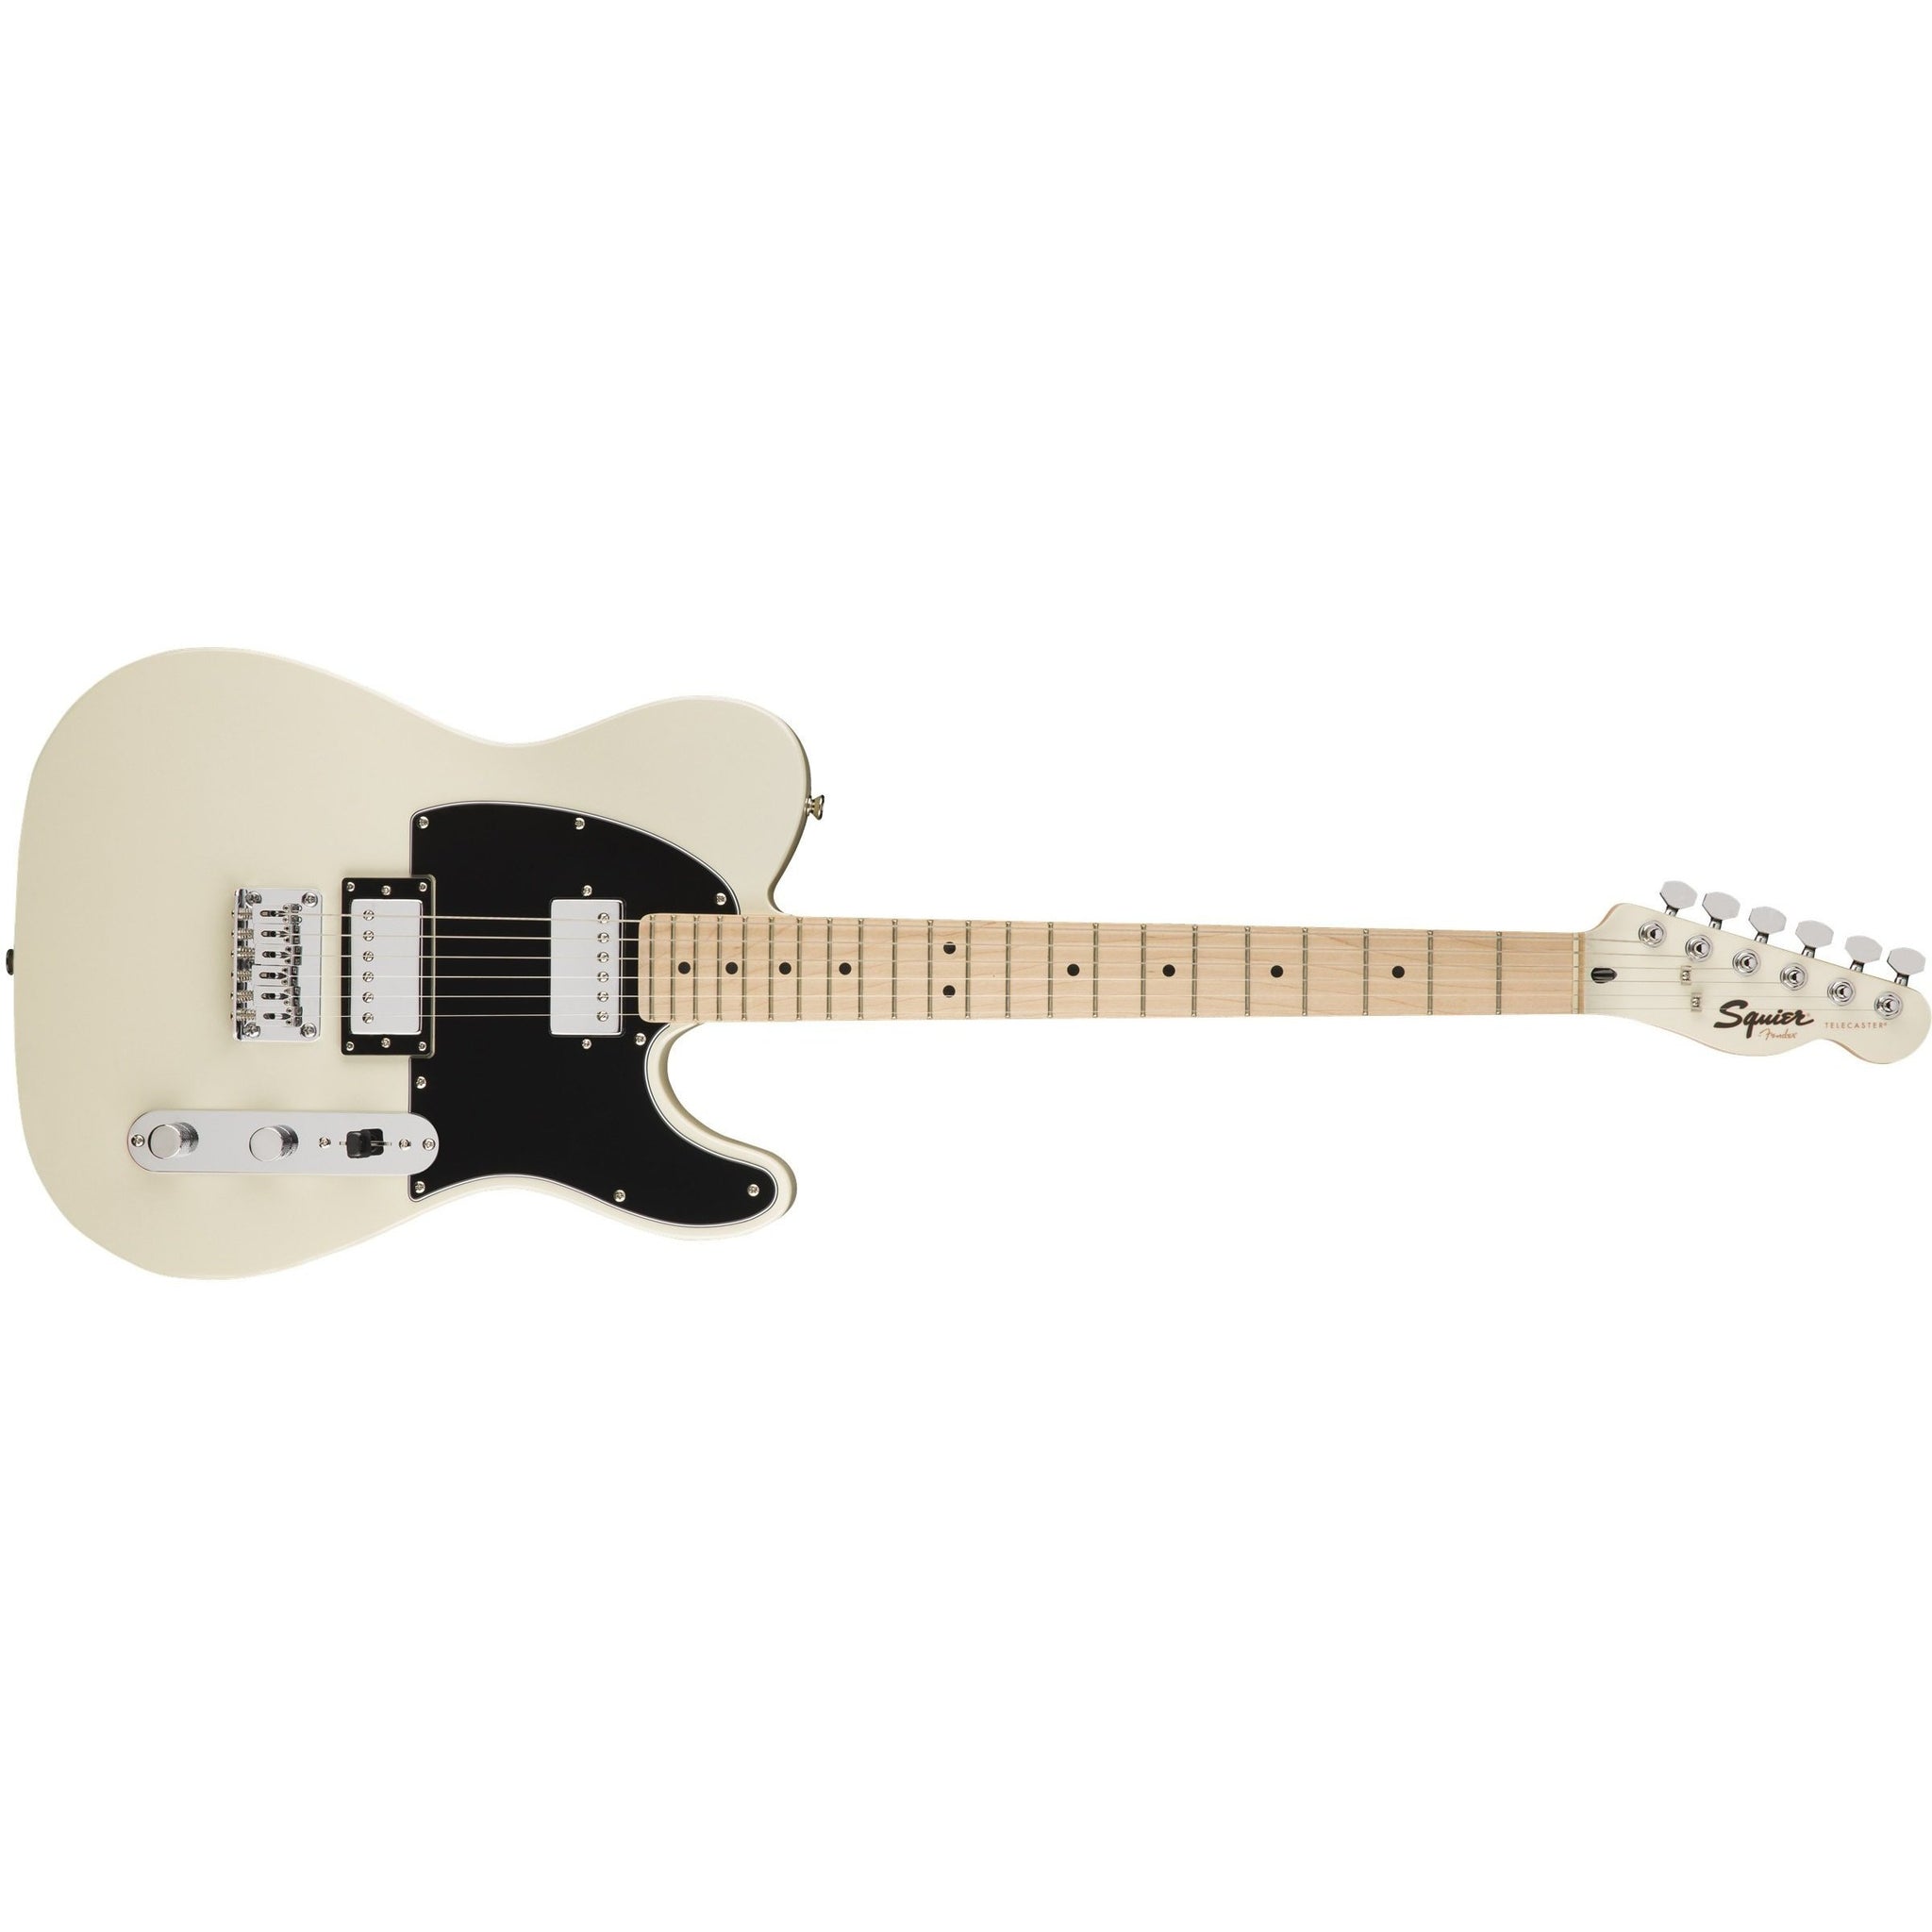 Fender Squier Contemporary Telecaster HH Electric Guitar MN Pearl White (Discontinued)-Music World Academy